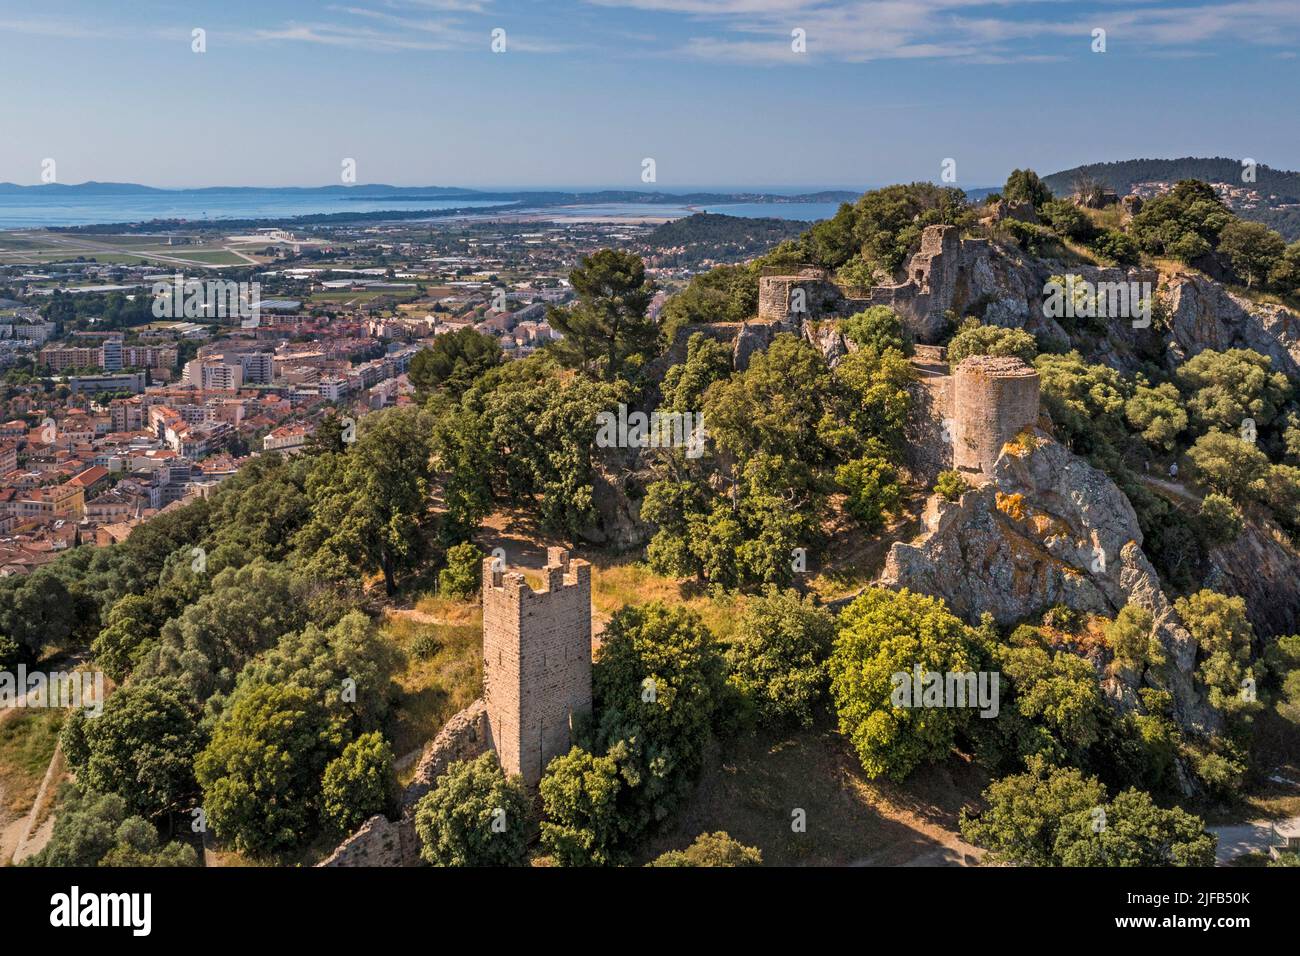 France, Var, Hyeres, Massif des Maurettes, Castéou hill, 11th century Hyeres Castle and the tombolo of the Peninsula of Giens in the background (aerial view) Stock Photo